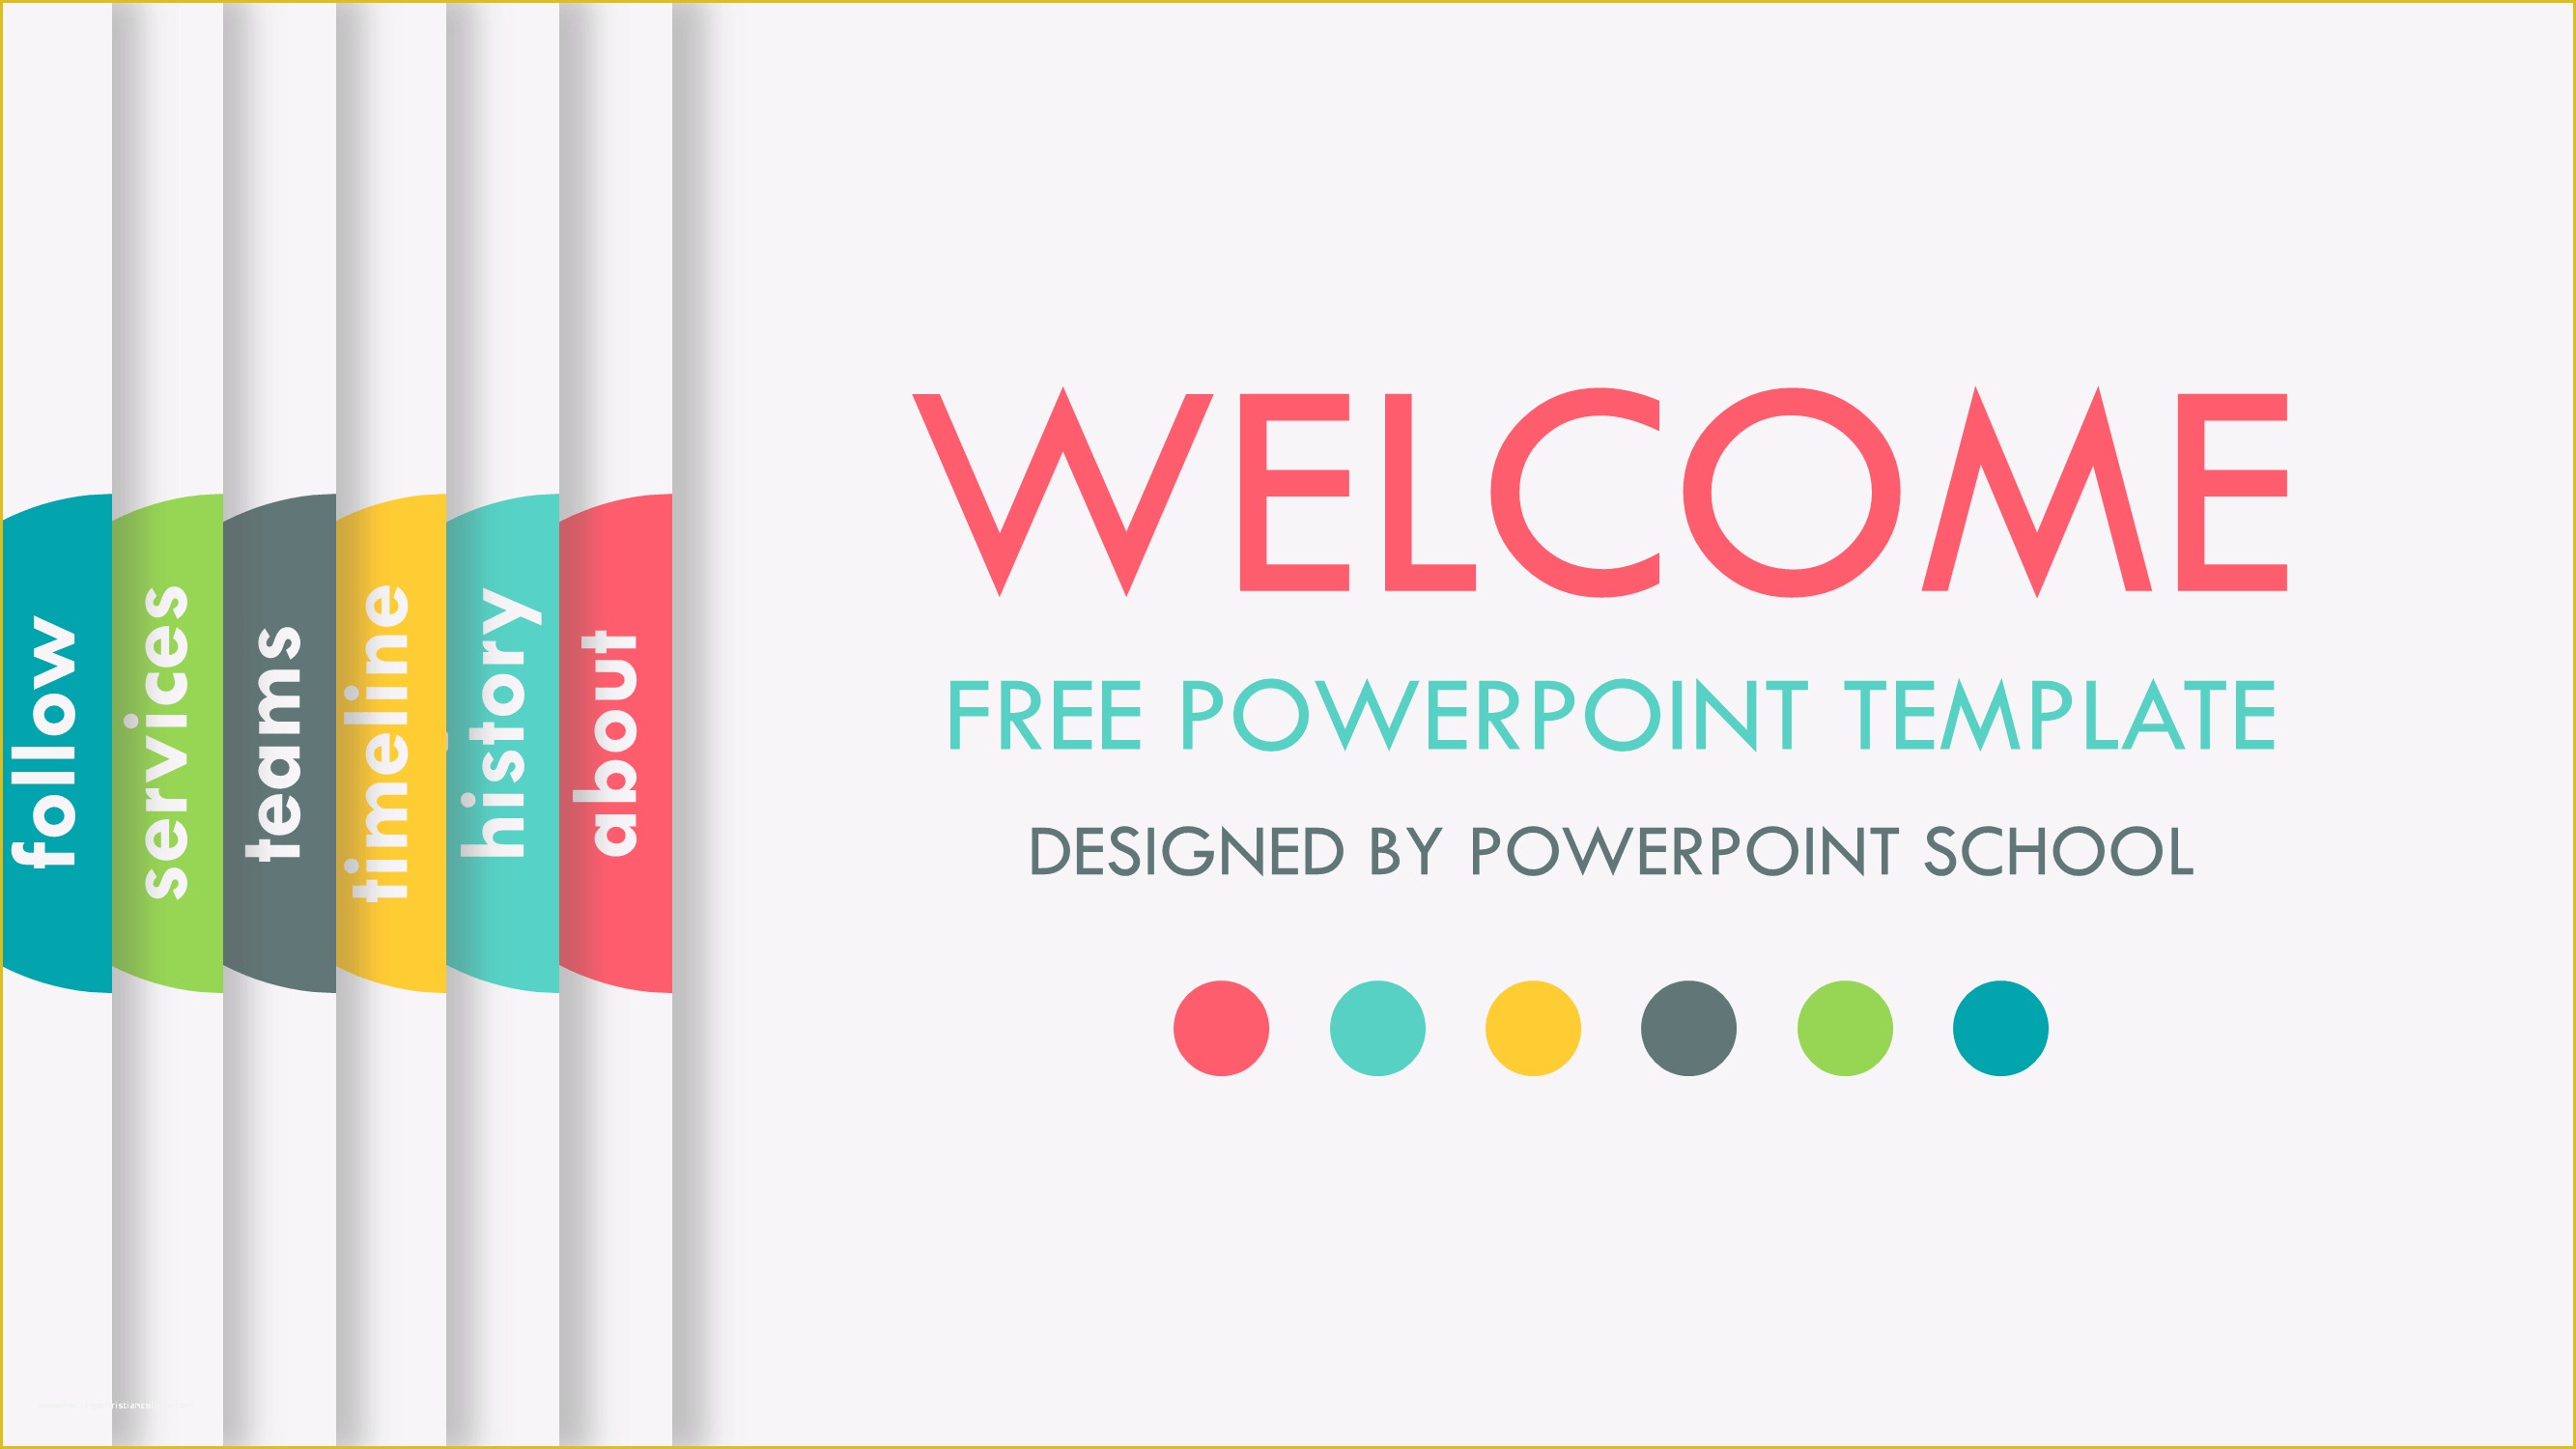 Best Ppt Templates Free Download Of Lovely Awesome Powerpoint Templates